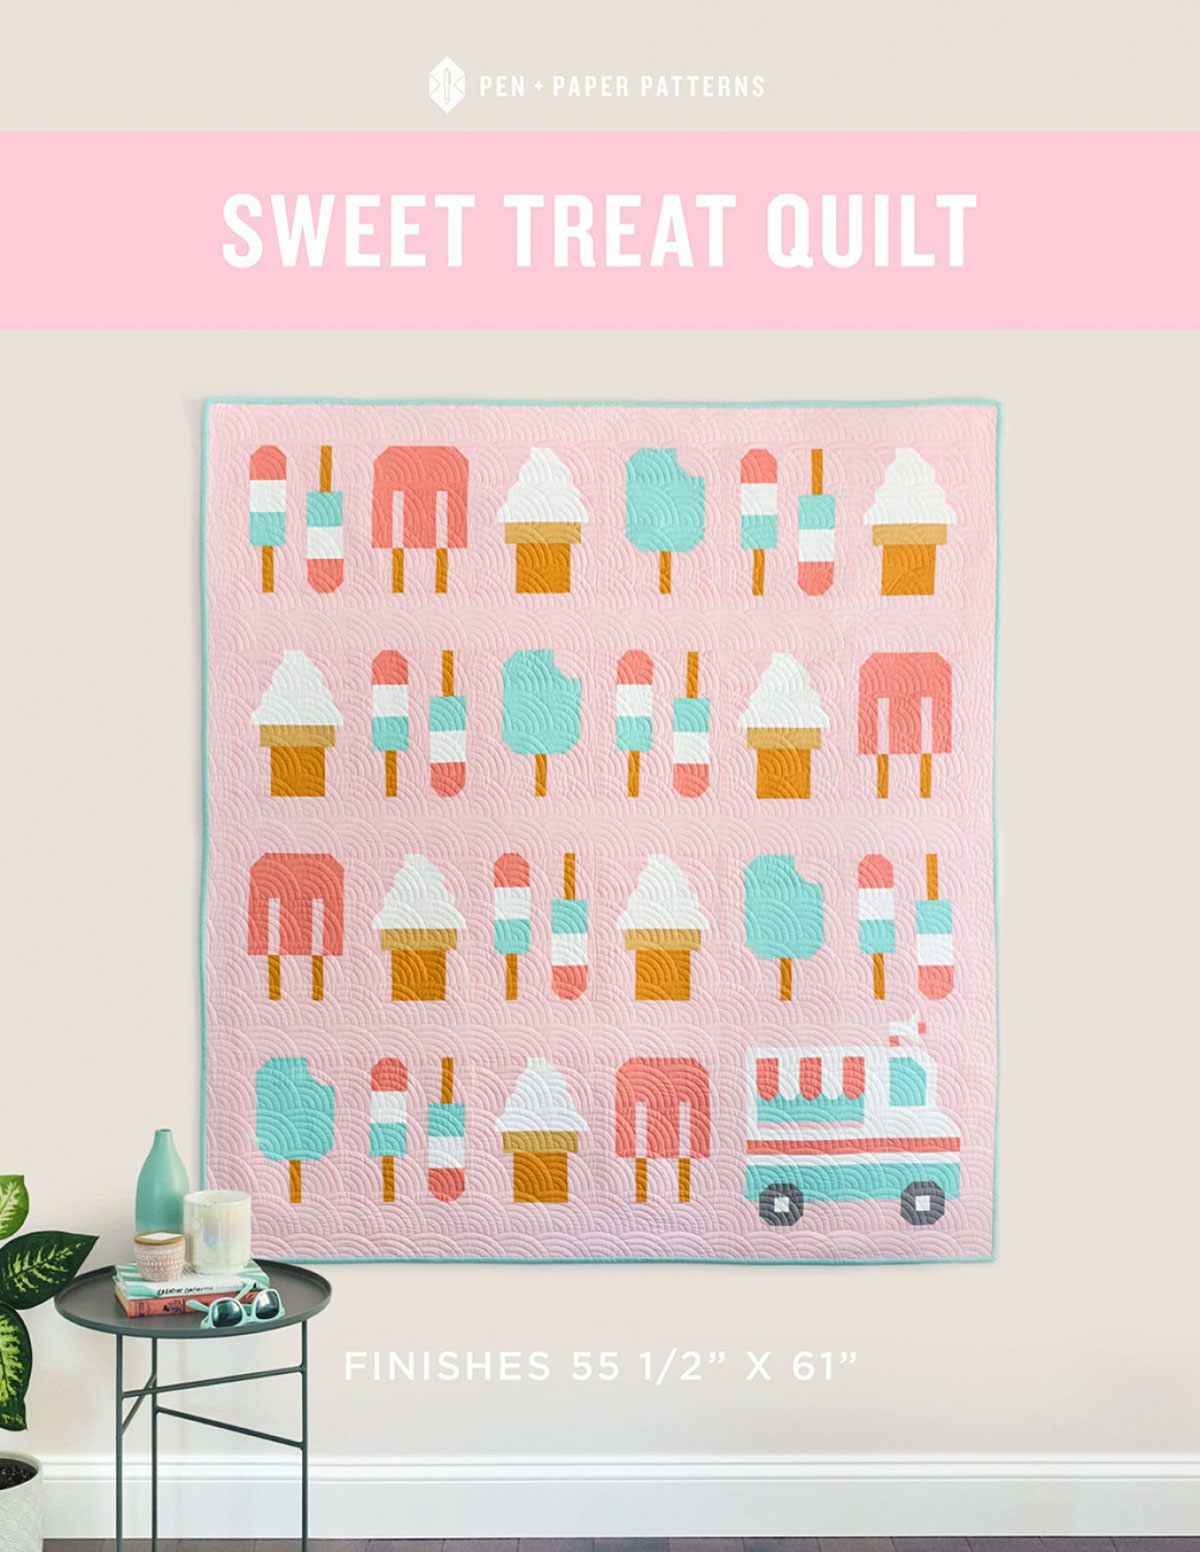 Sweet-Treat-quilt-sewing-pattern-from-Pen-plus-paper-patterns-front